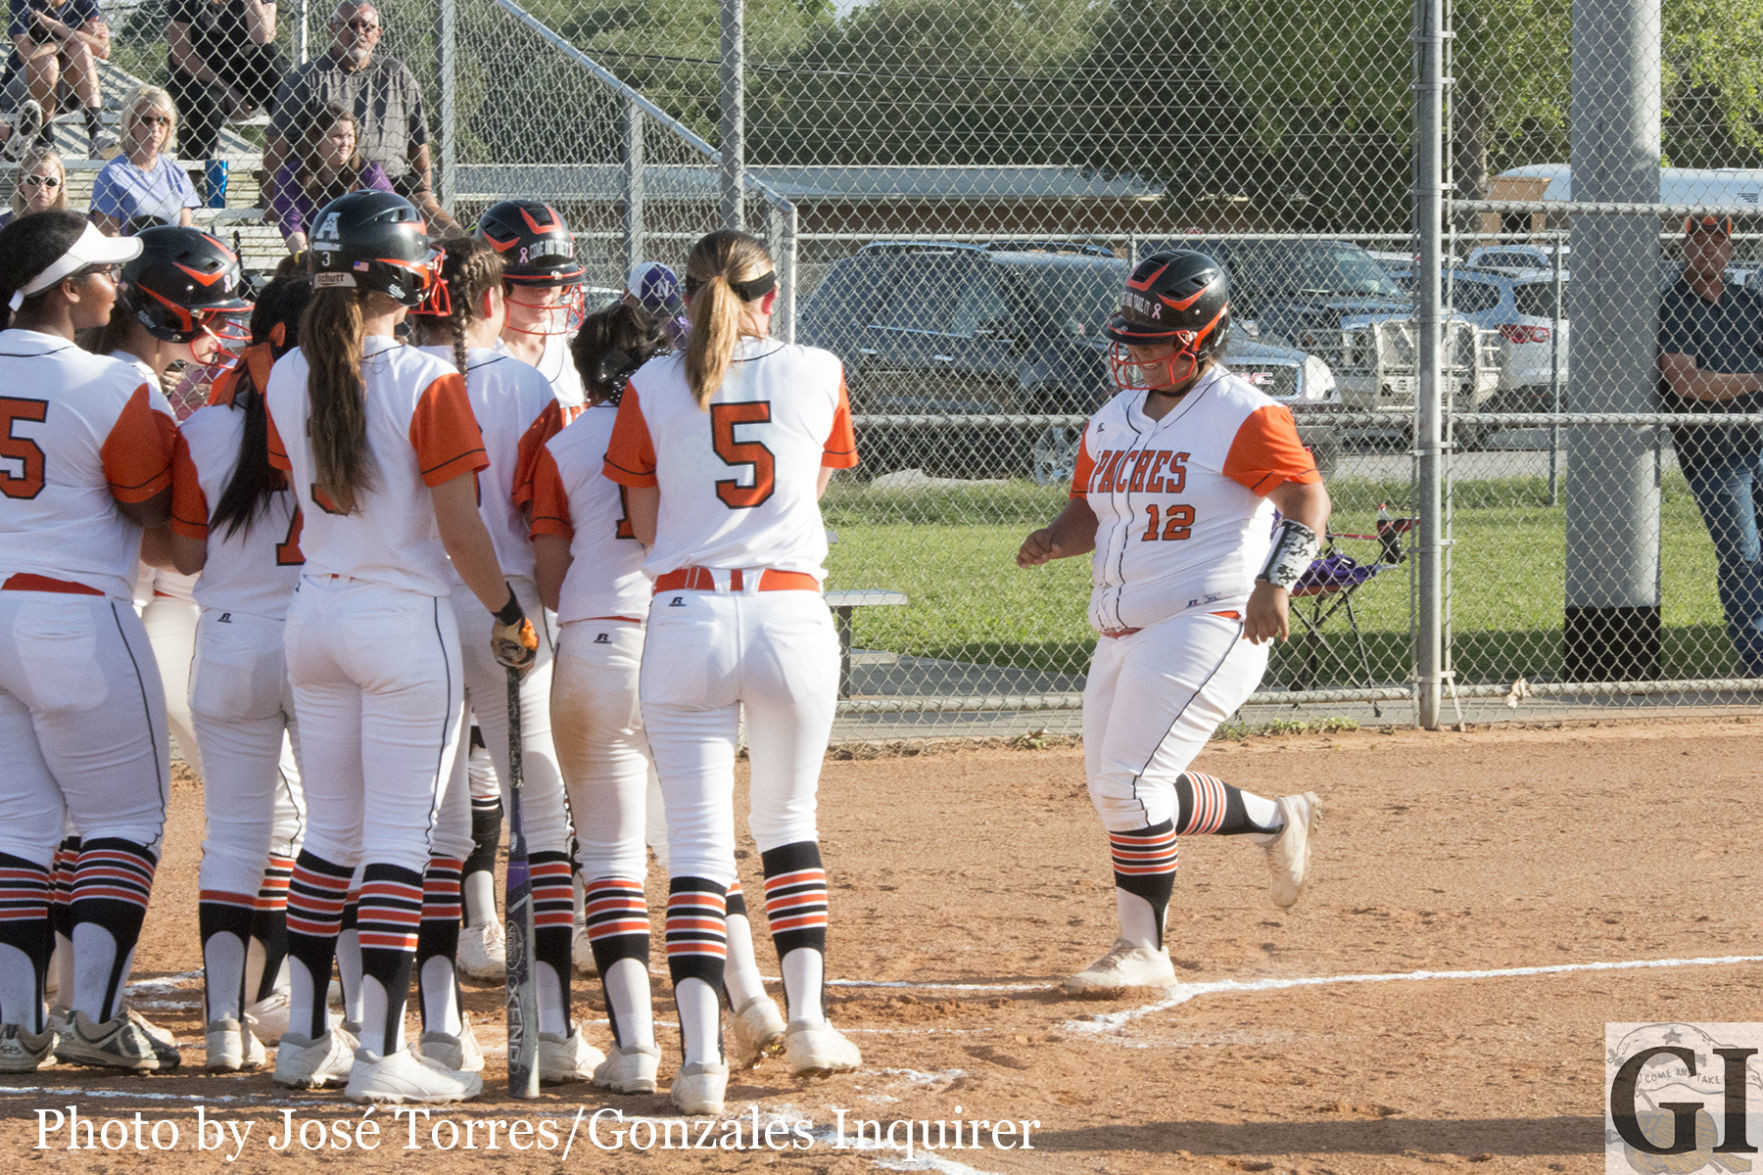 Karina Vara (12) celebrates her grand slam with her teammates in Gonzales’ 5-1 win over Navarro. Vara finished the night going 2-for-2 with four RBIs and a walk.